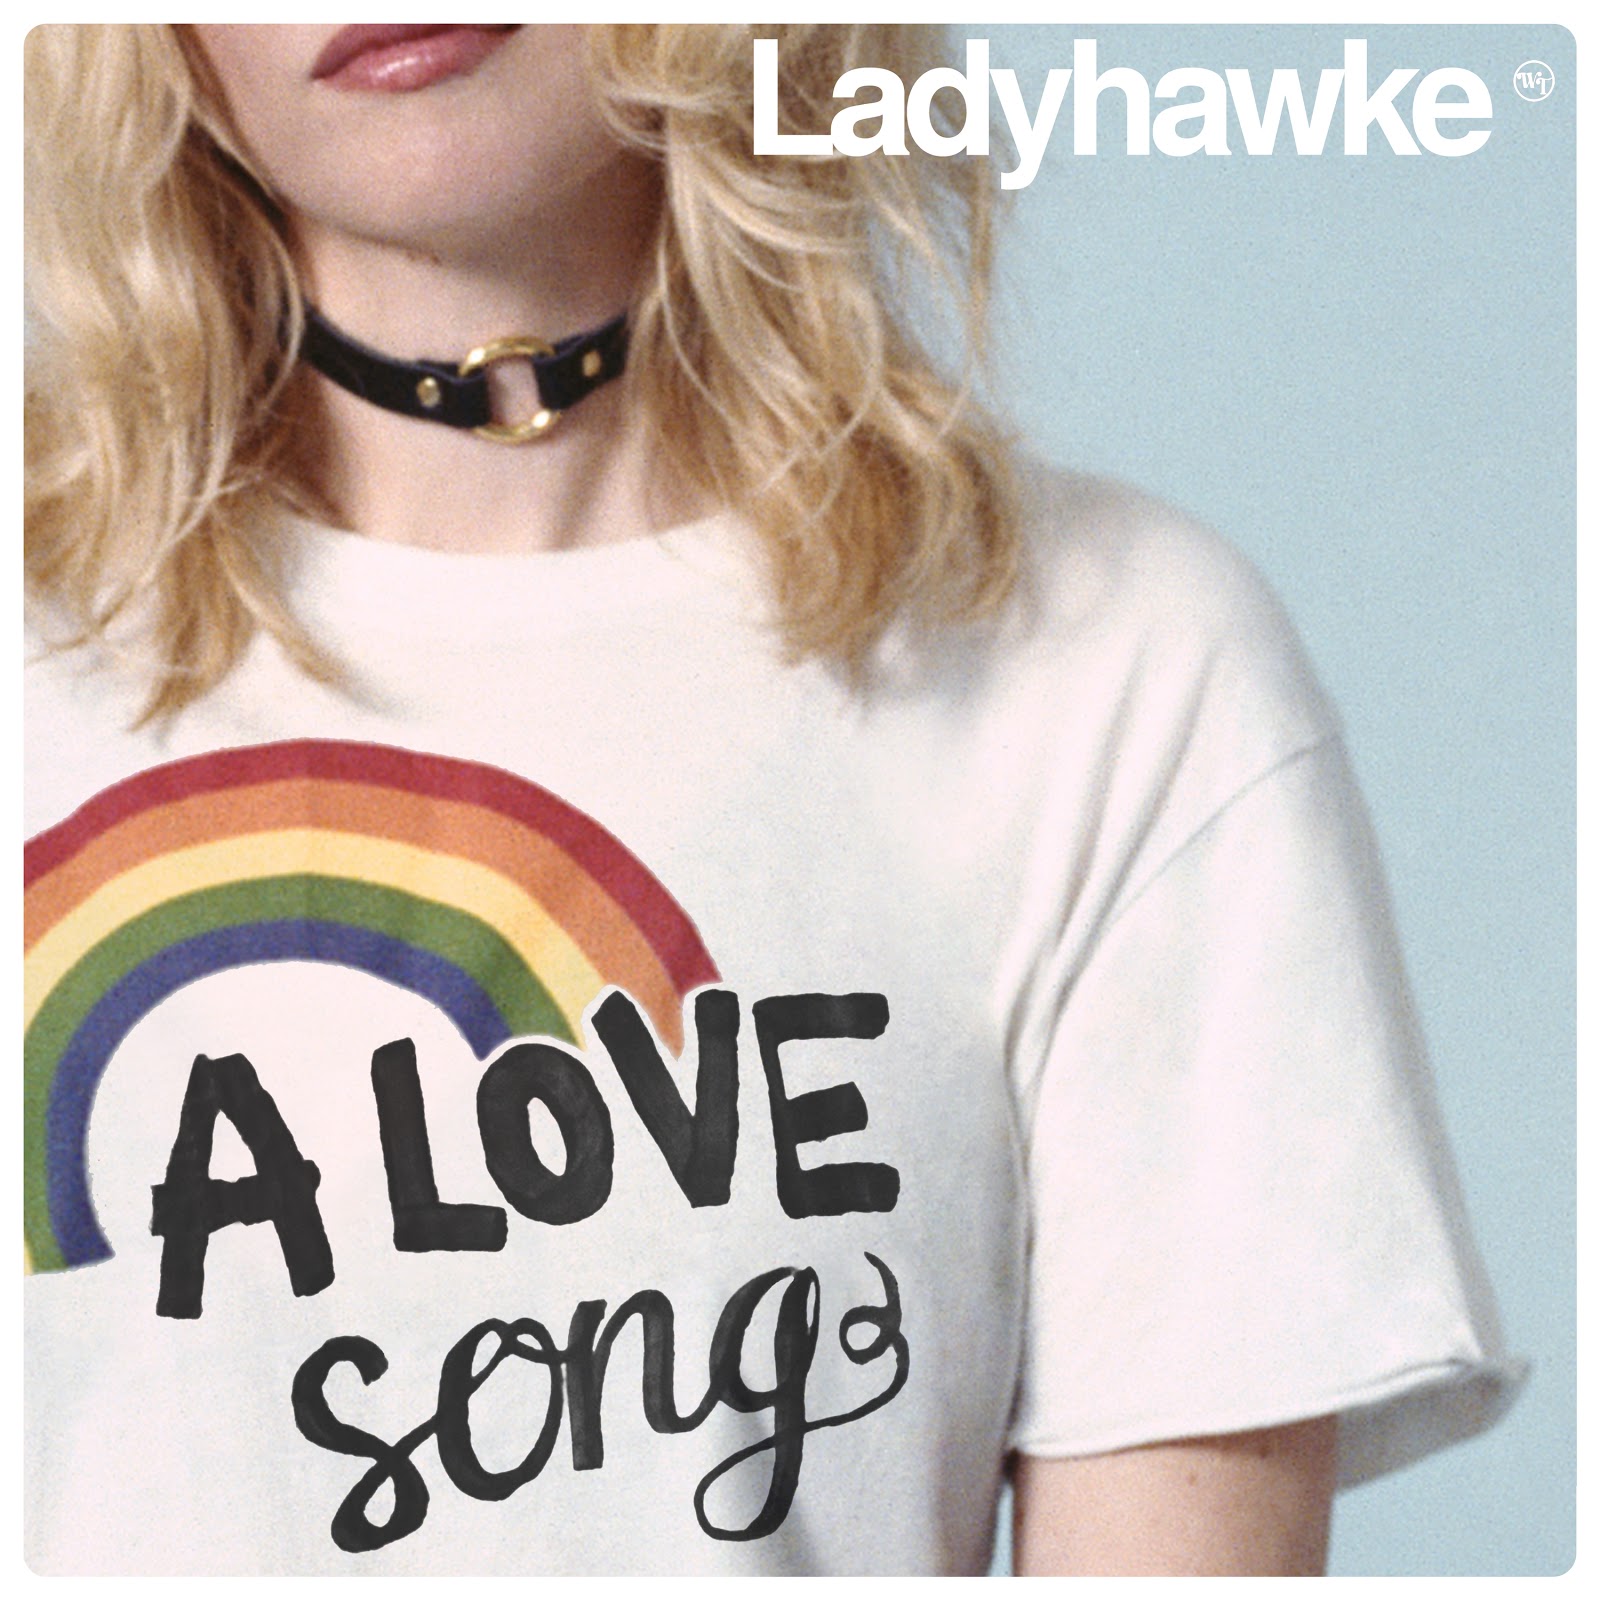 Ladyhawke releases video for "Wild Things"